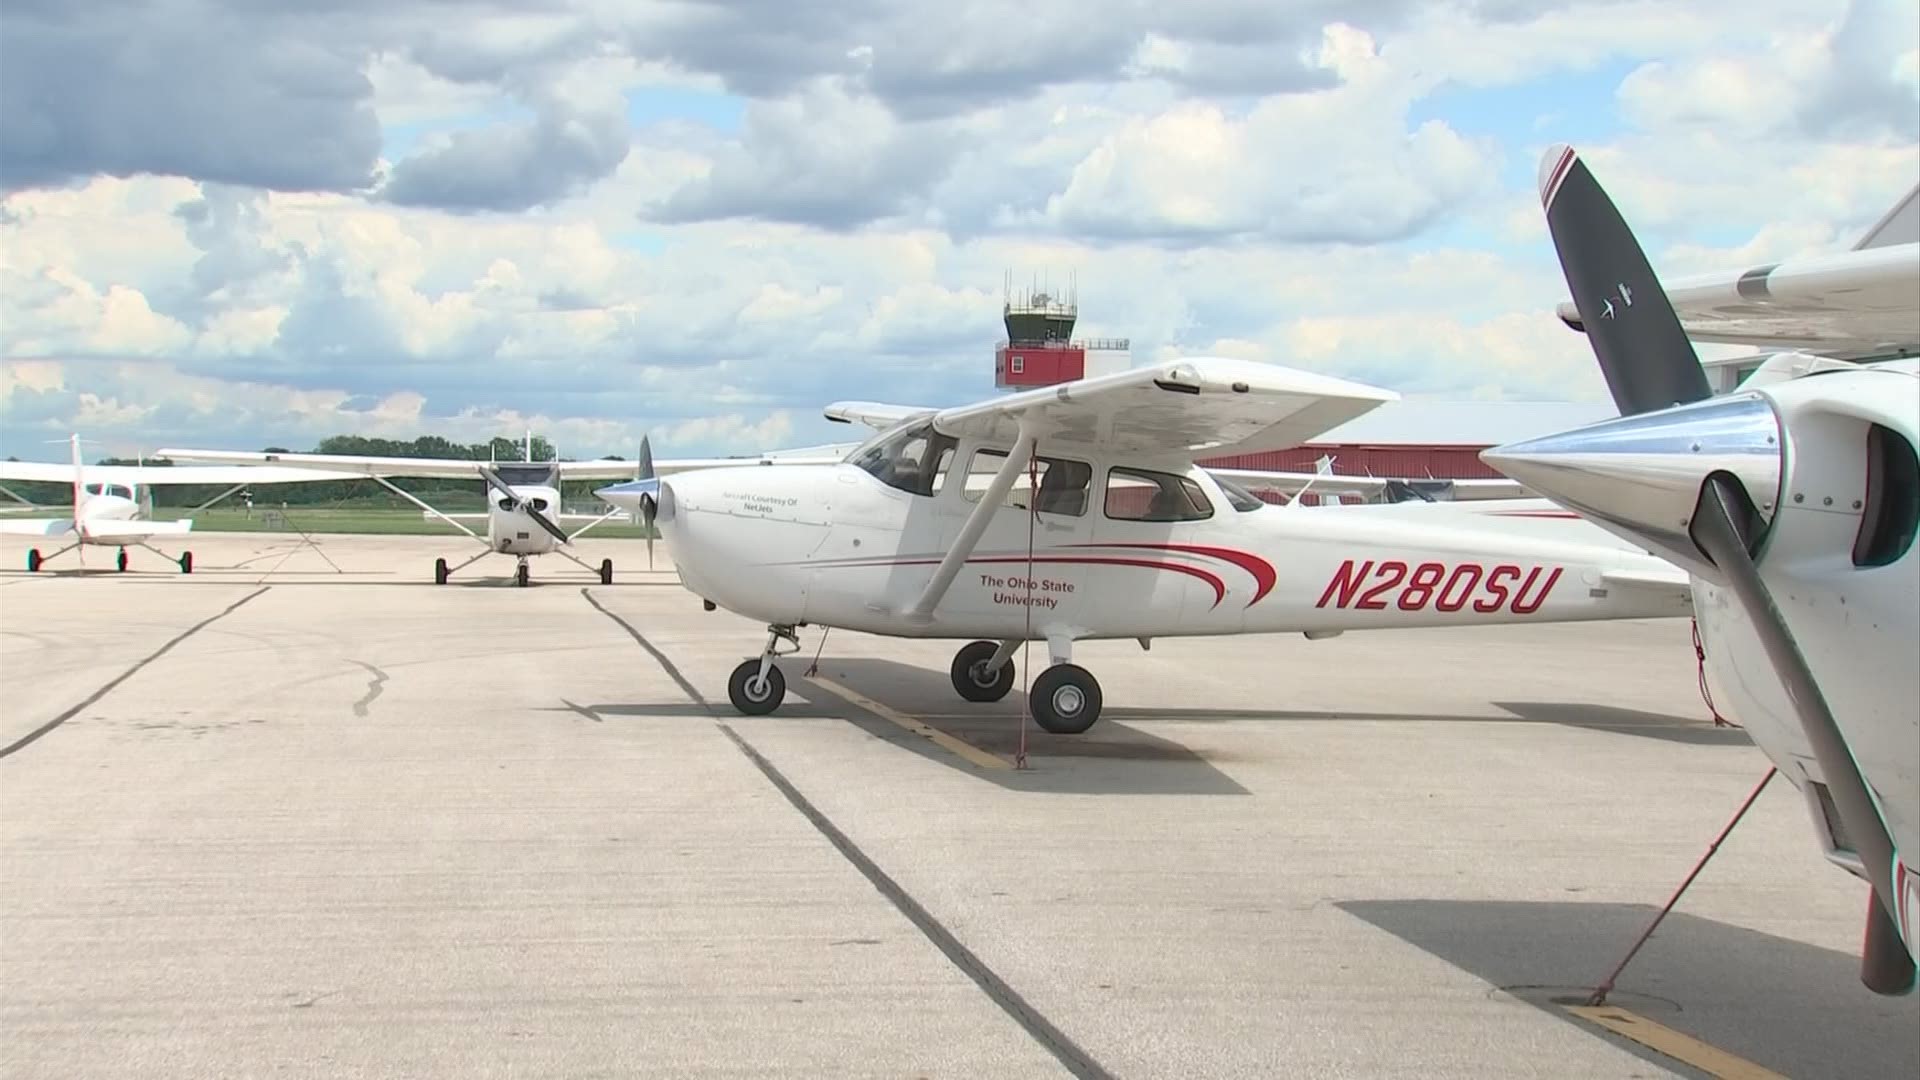 An increase in pilot training is raising concerns from neighbors who live in the flight path.